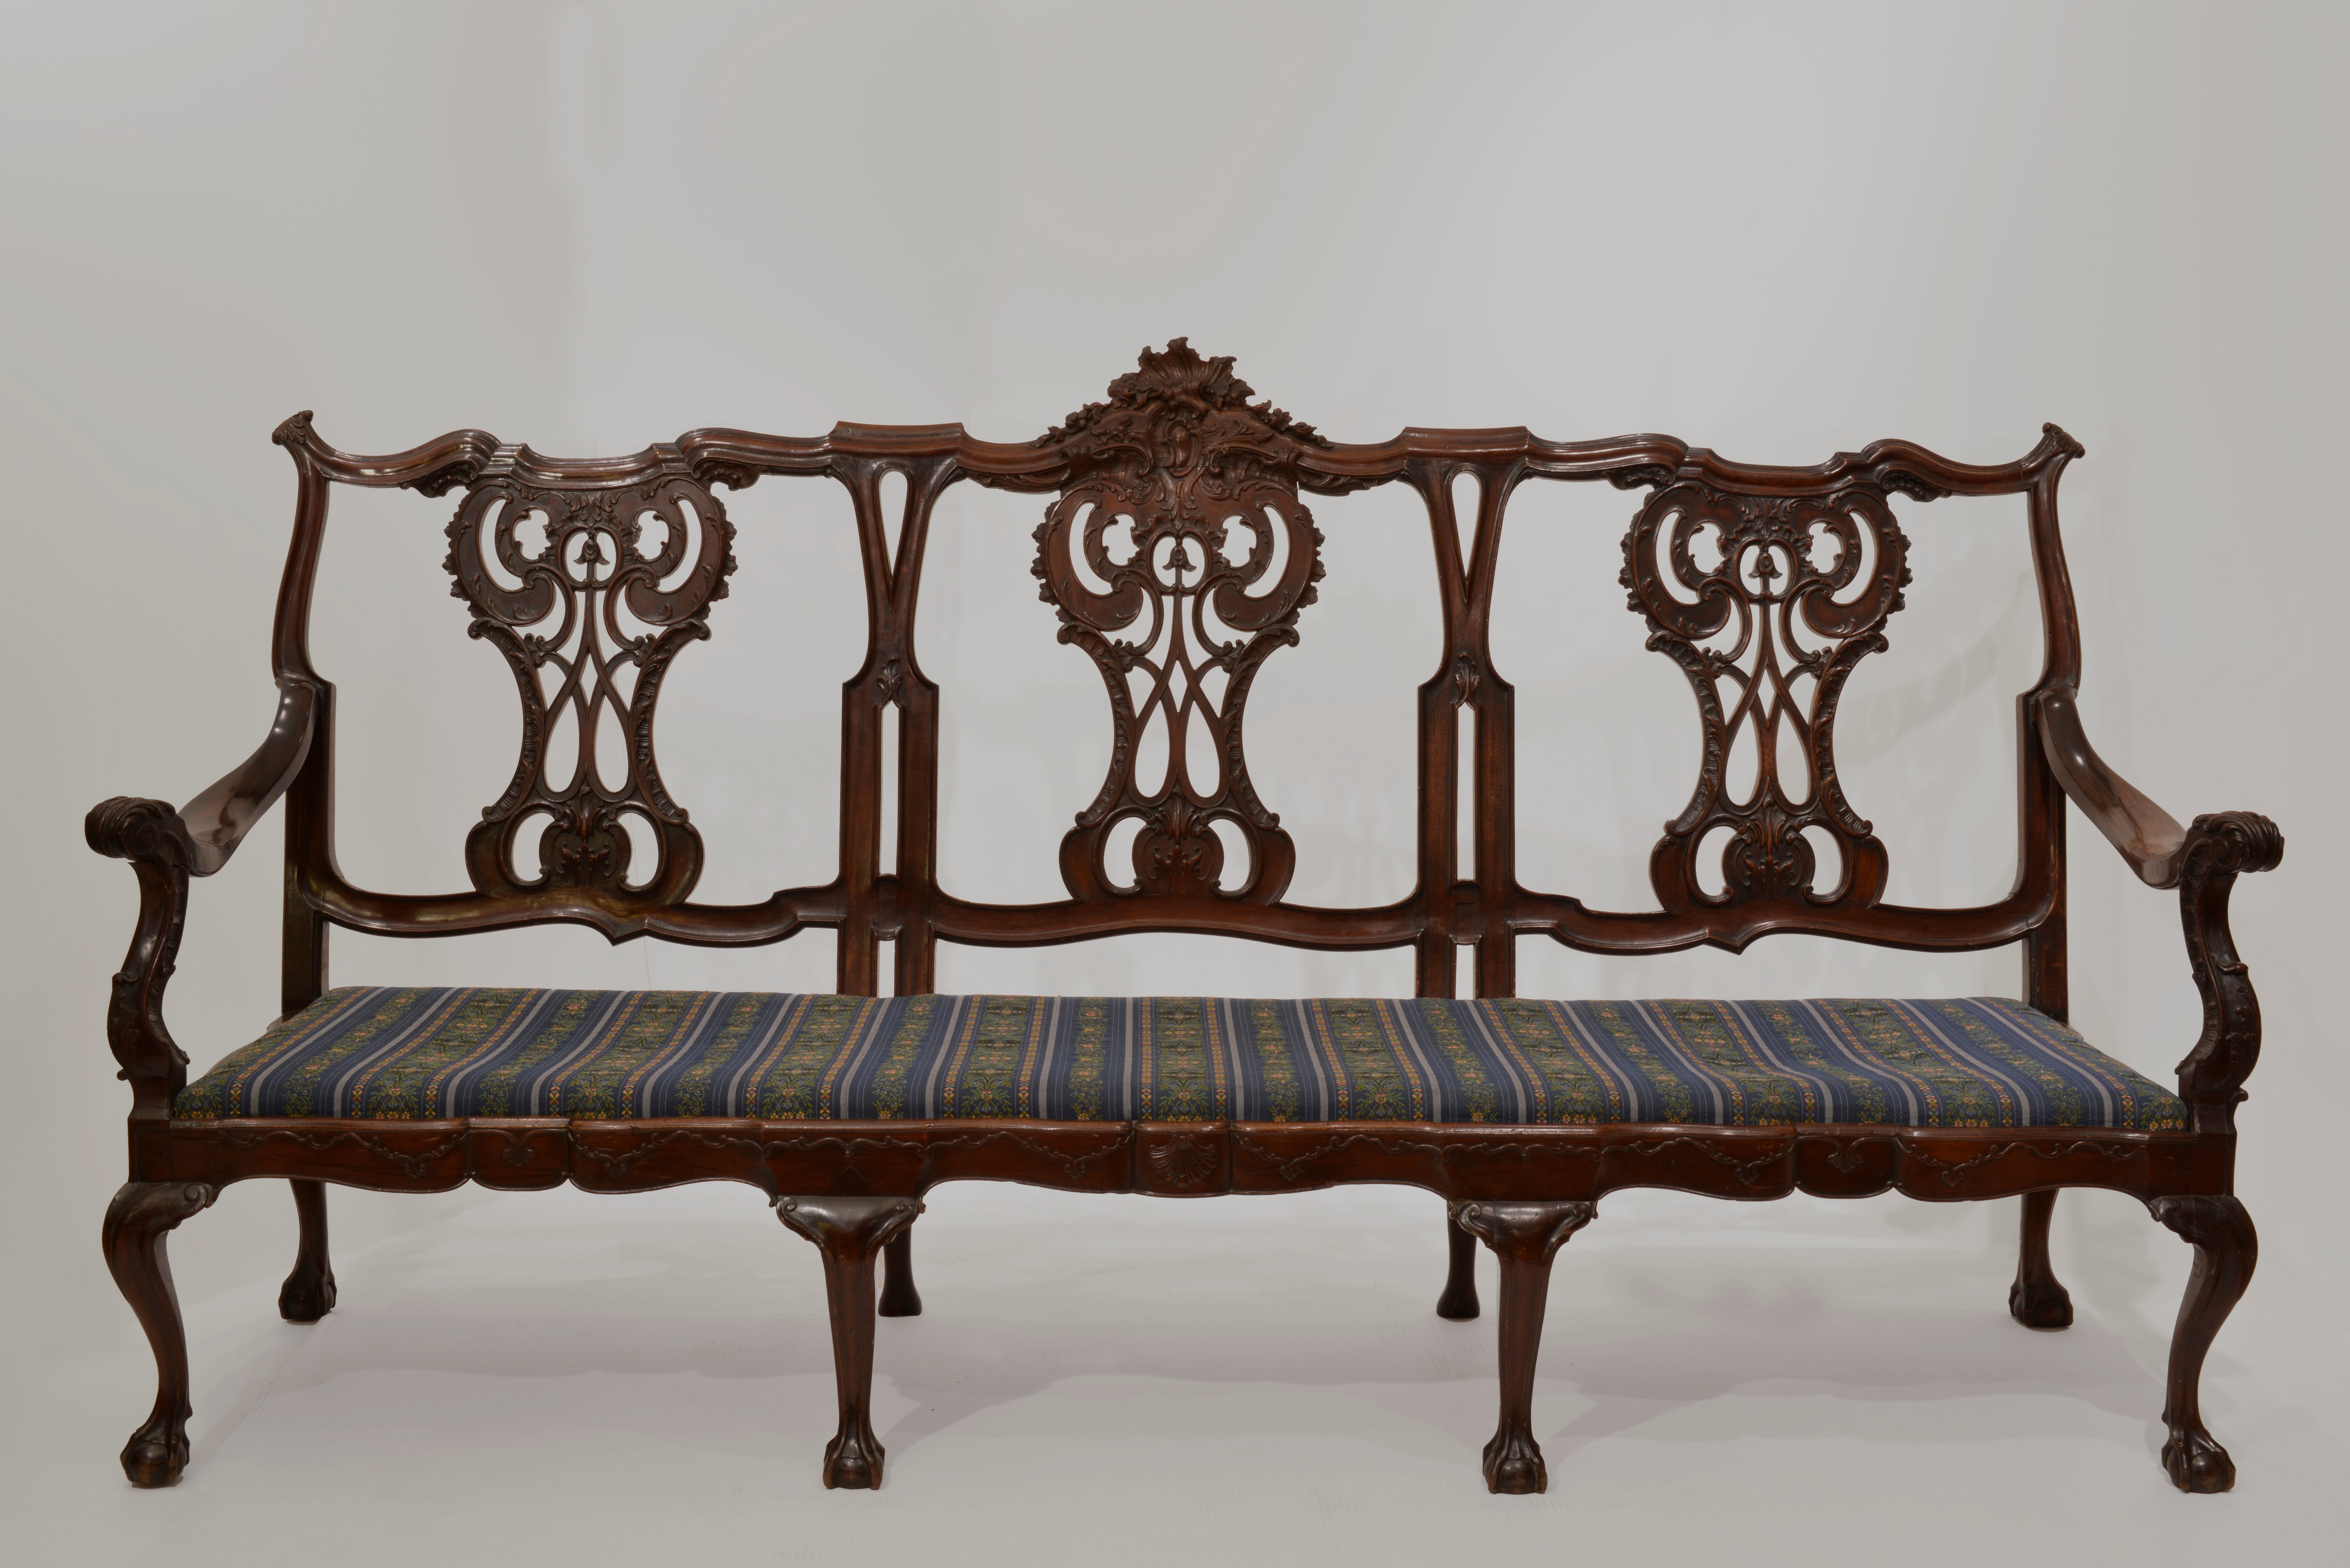 18th Century Settee from Brazil